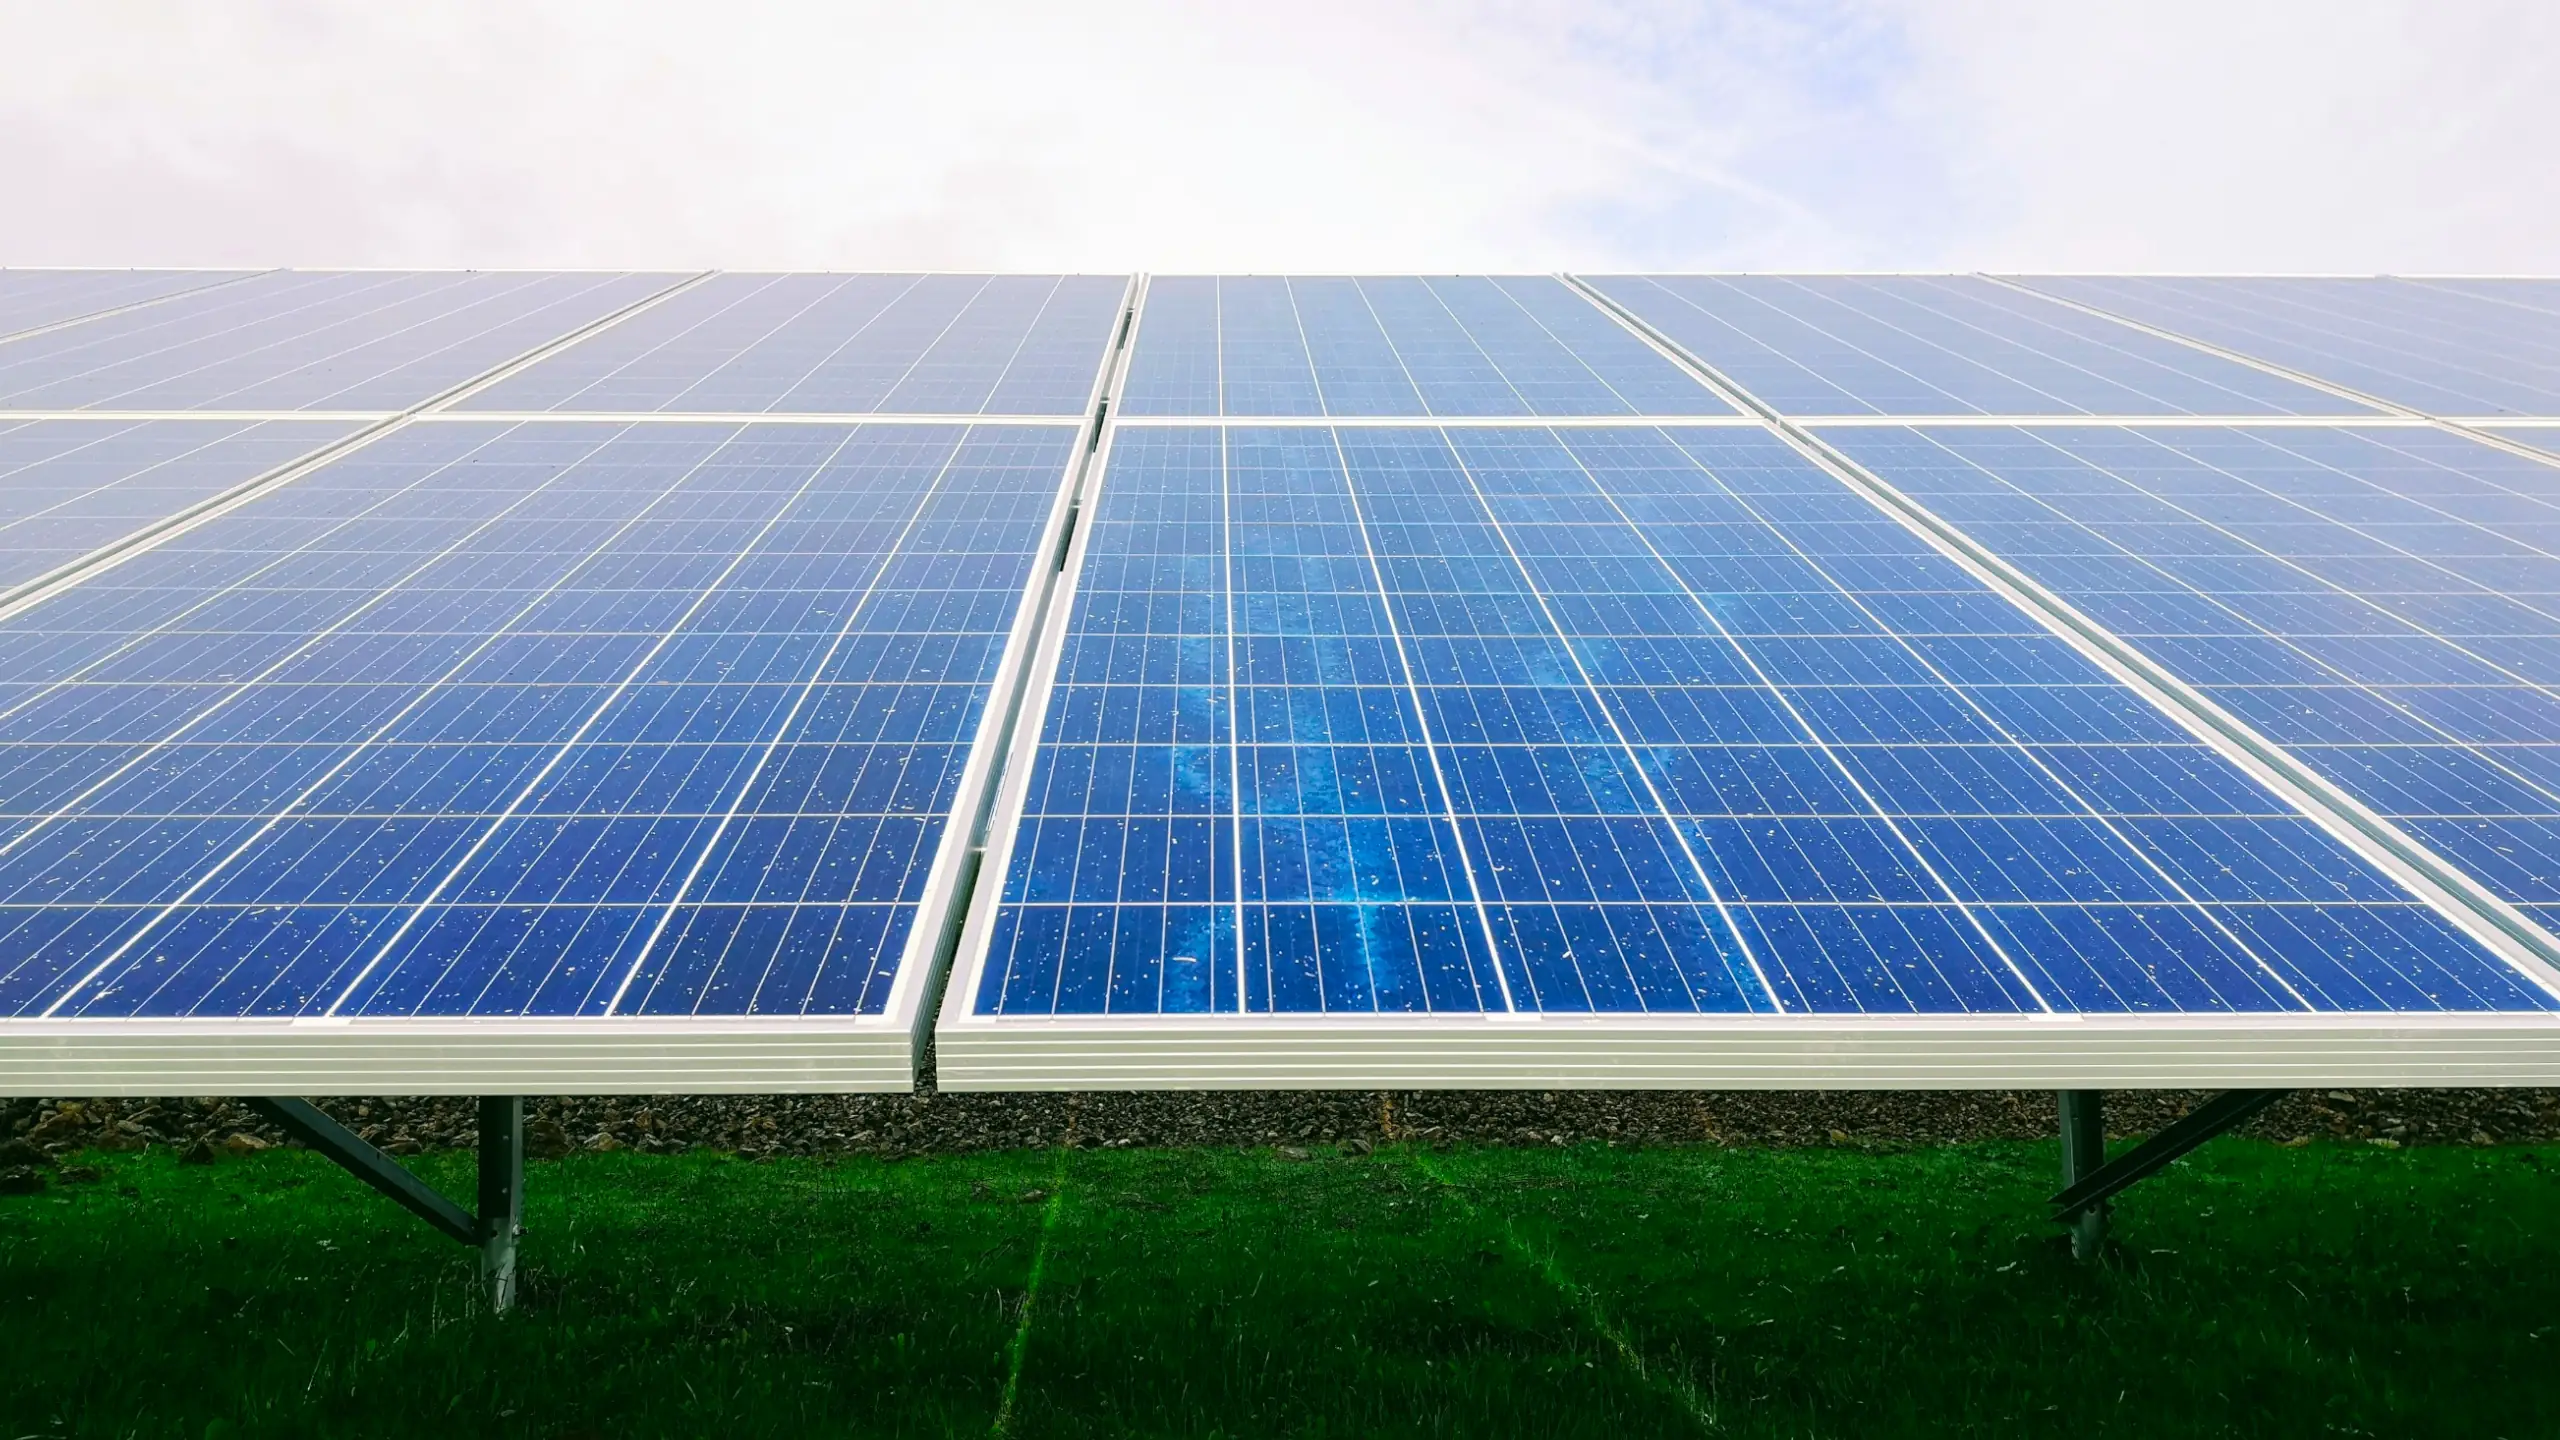 5 advantages of solar energy that can make our future sustainable